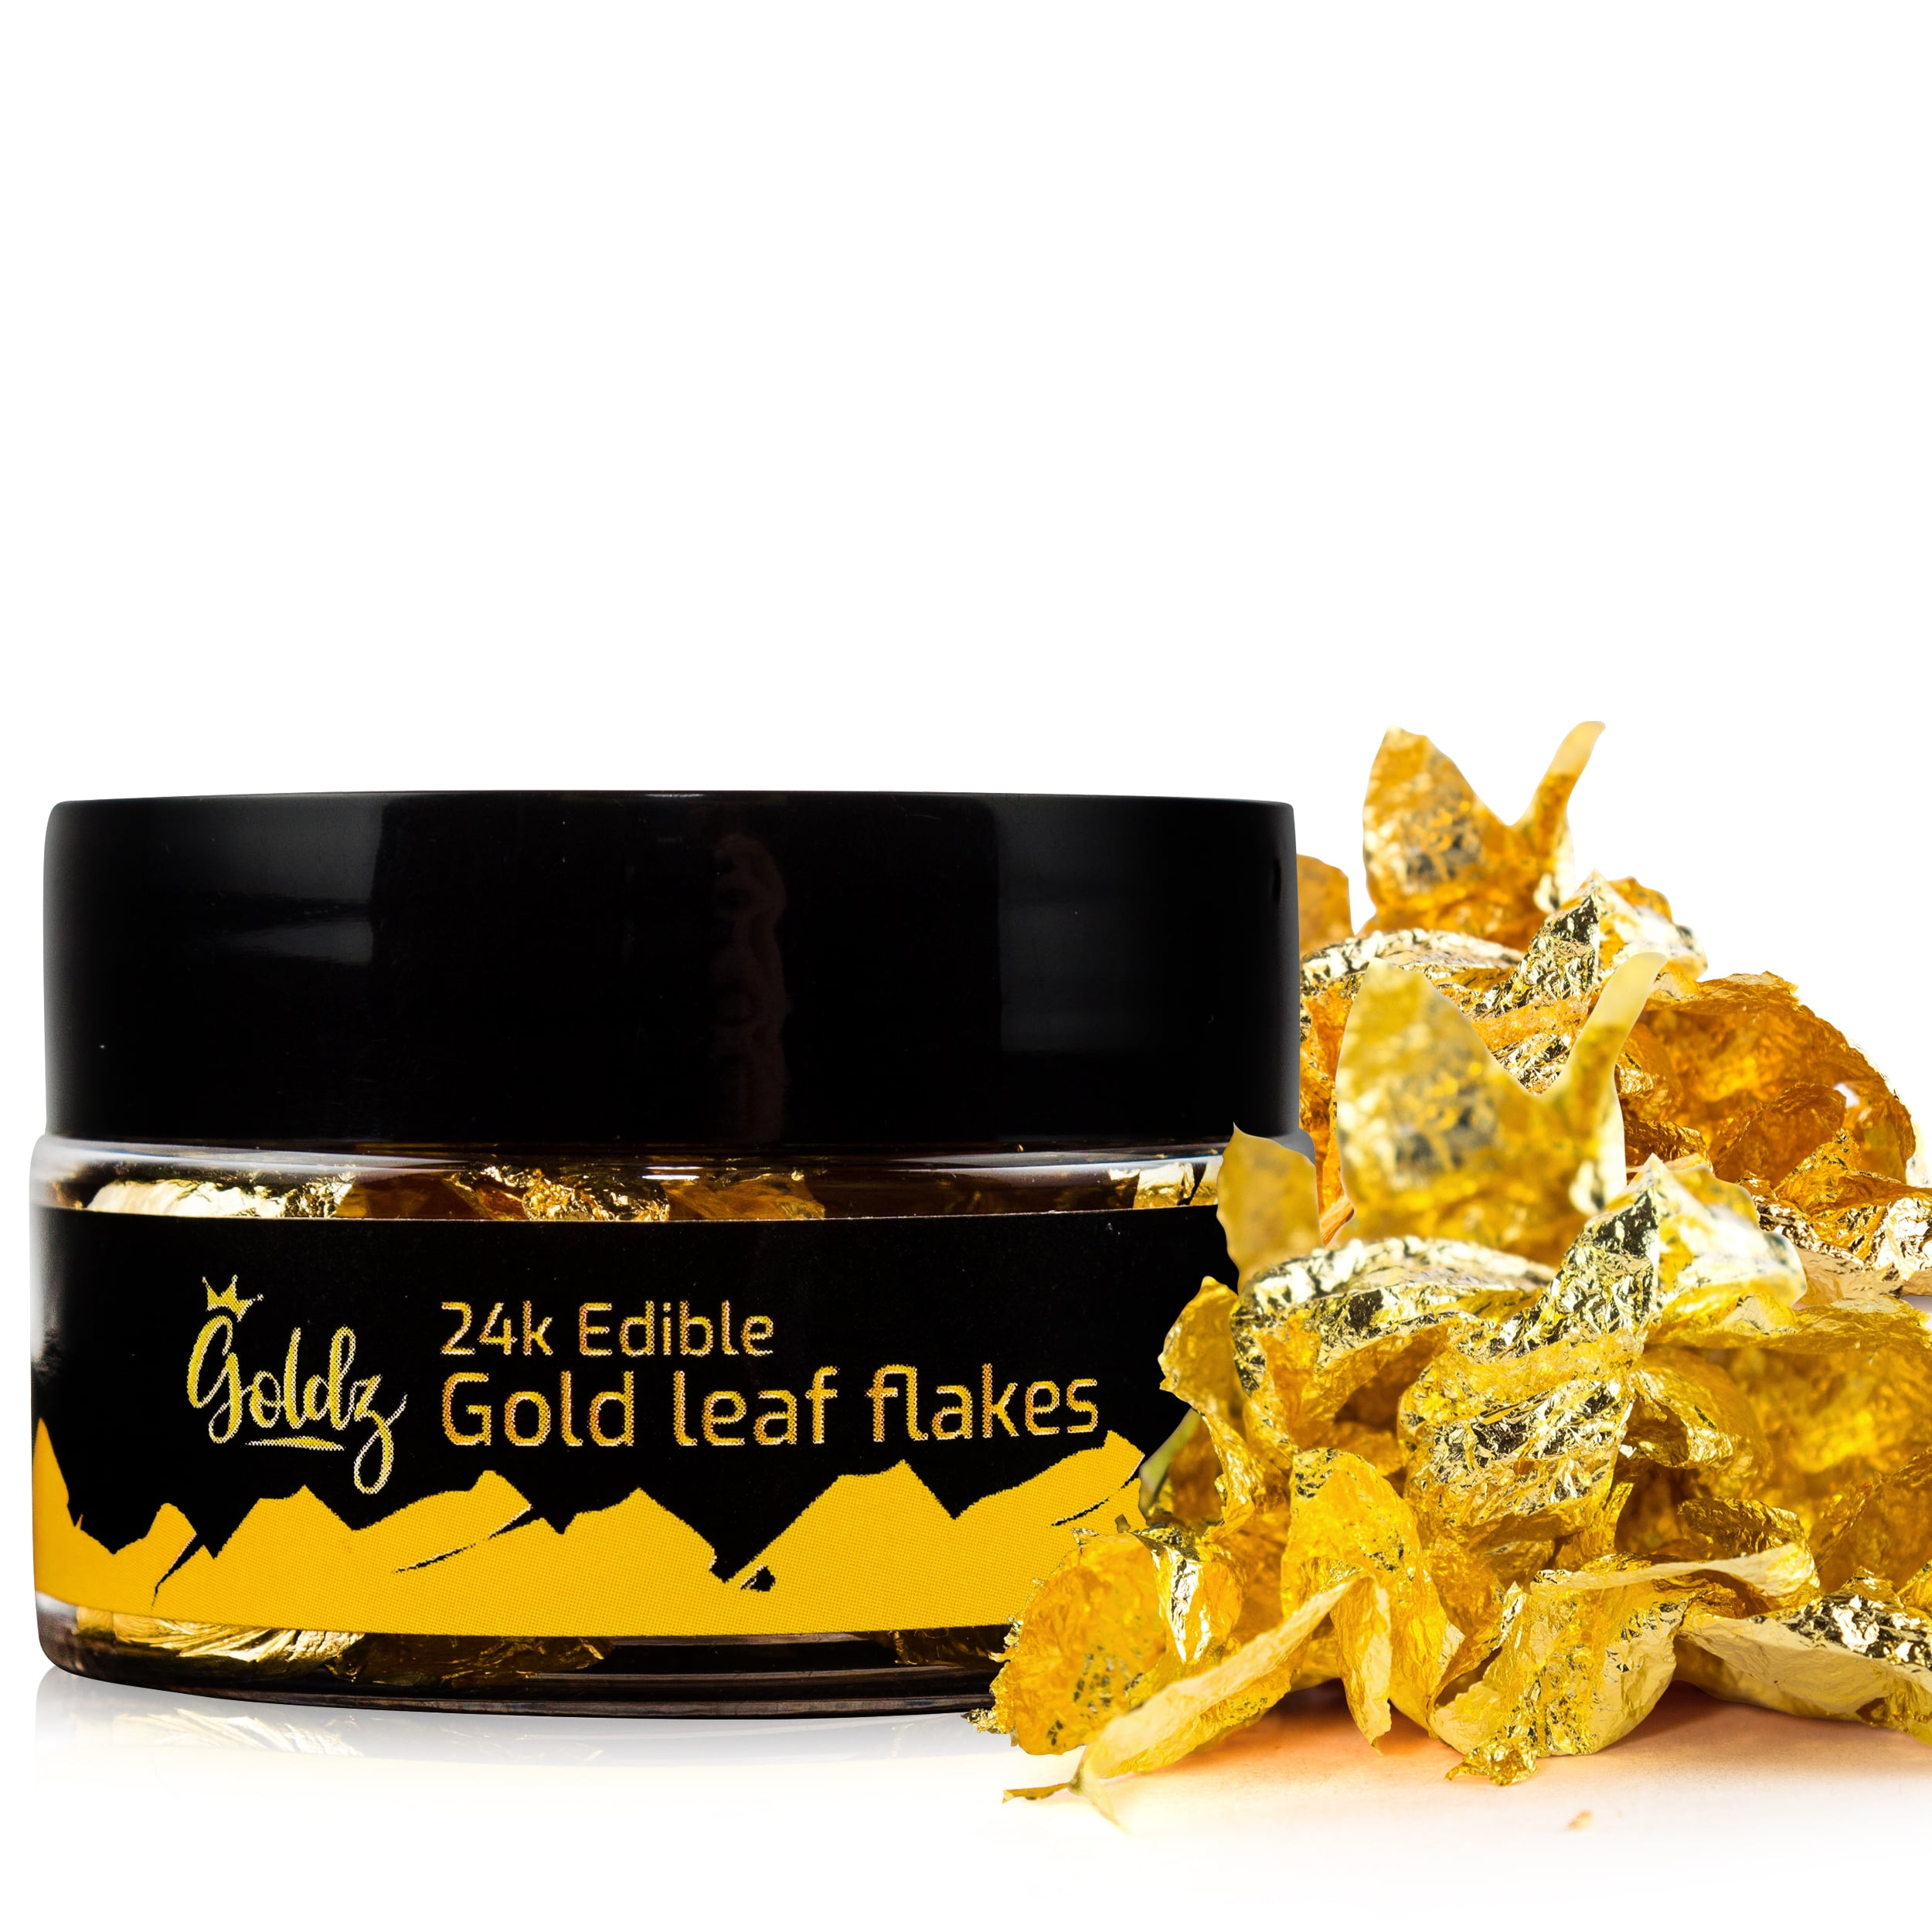 24K Edible Gold Leaf Flakes - DR DELICACY